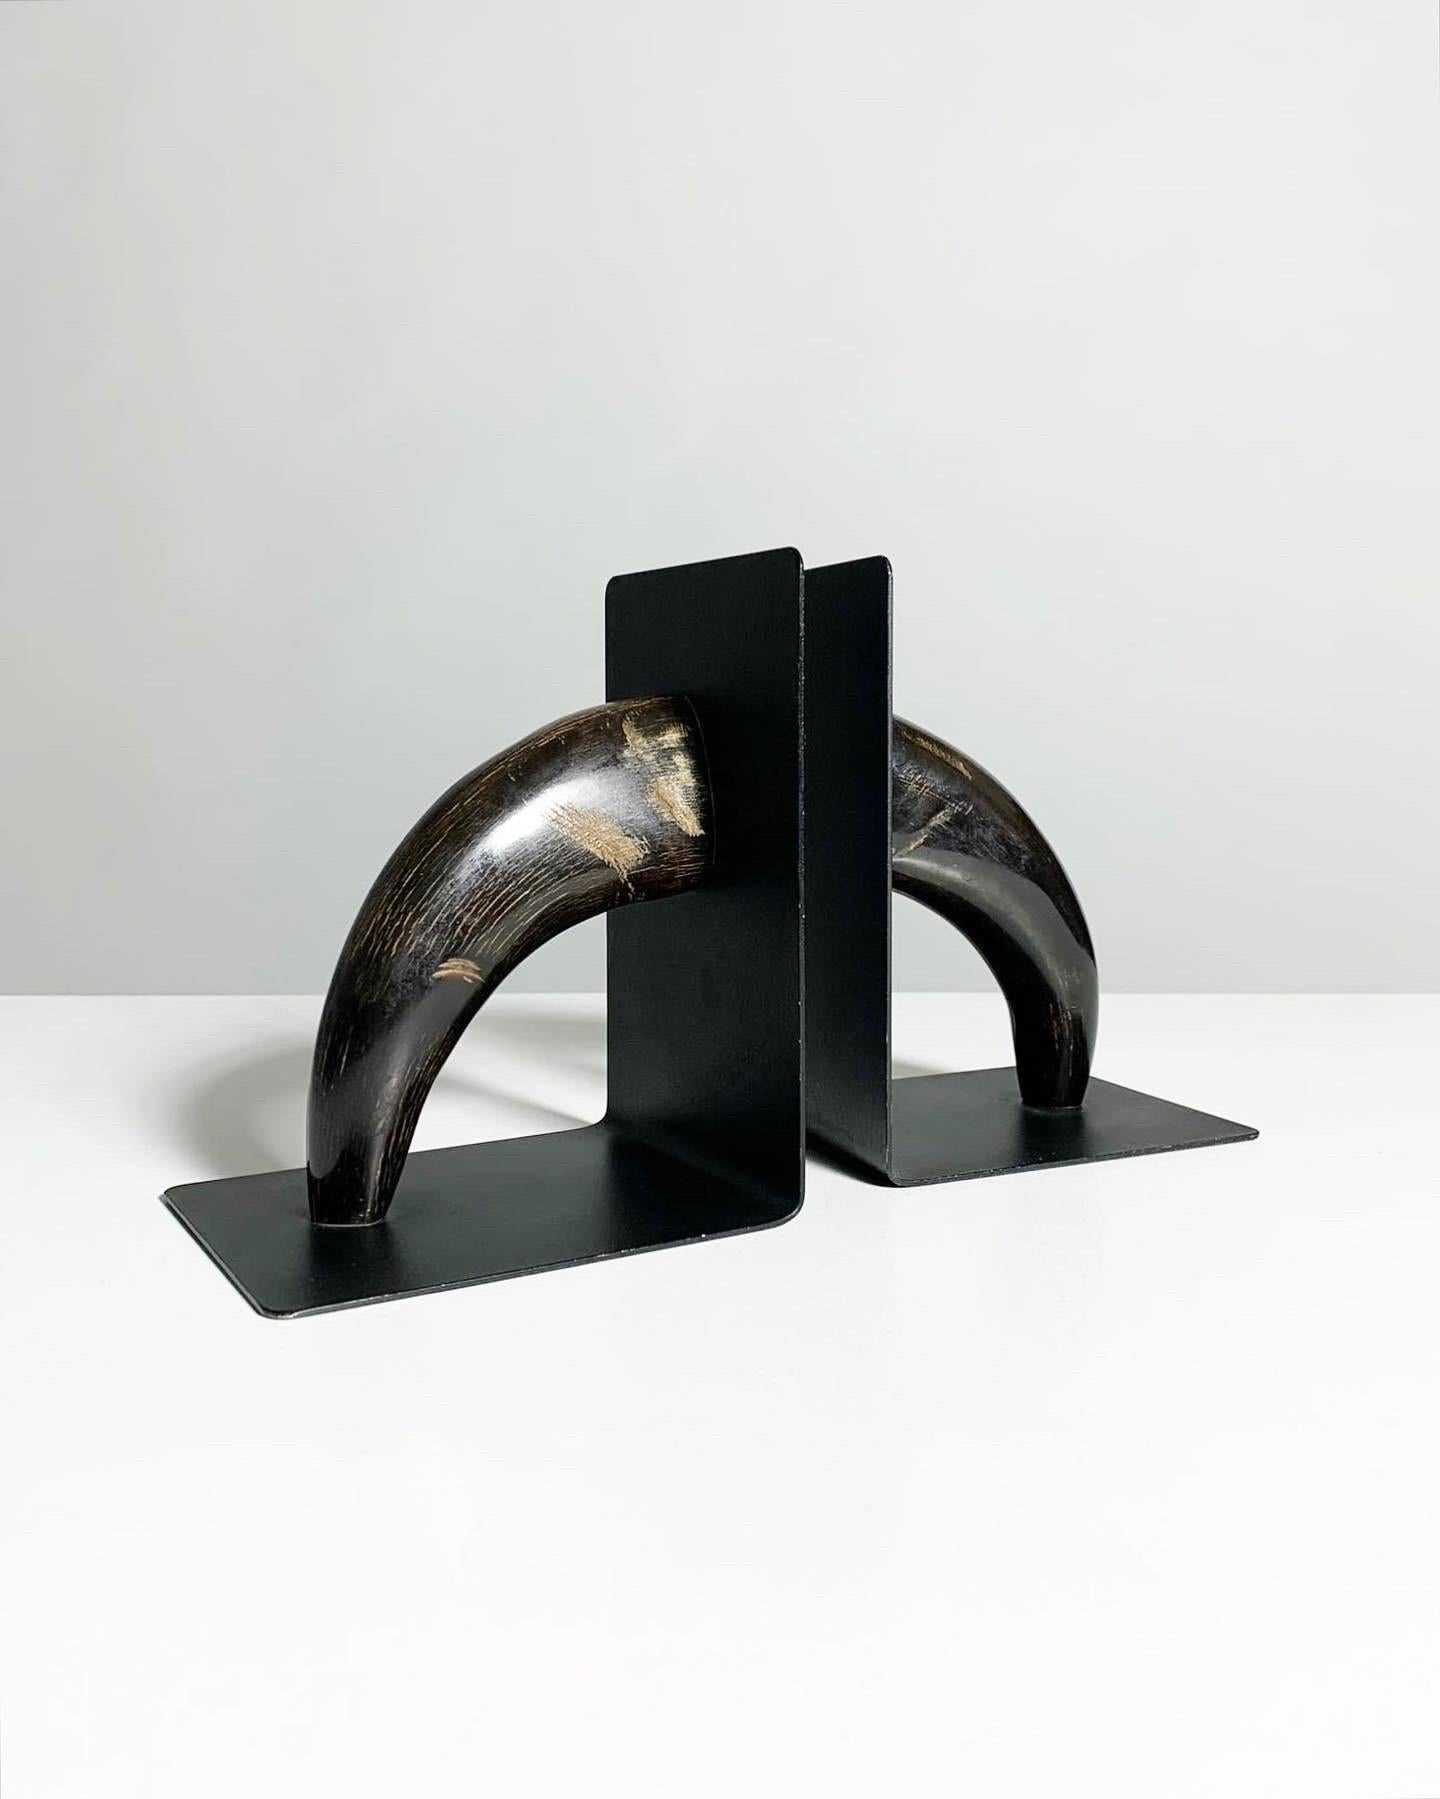 Rare pair of Carl Auböck book ends in blackened brass & horn, model 4773 designed in 1958, manufactured at the Auböck workshop in Vienna, Austria.

Both stamped „Auböck“ on the underside. Very good condition, with minor wear.

Measures: width: